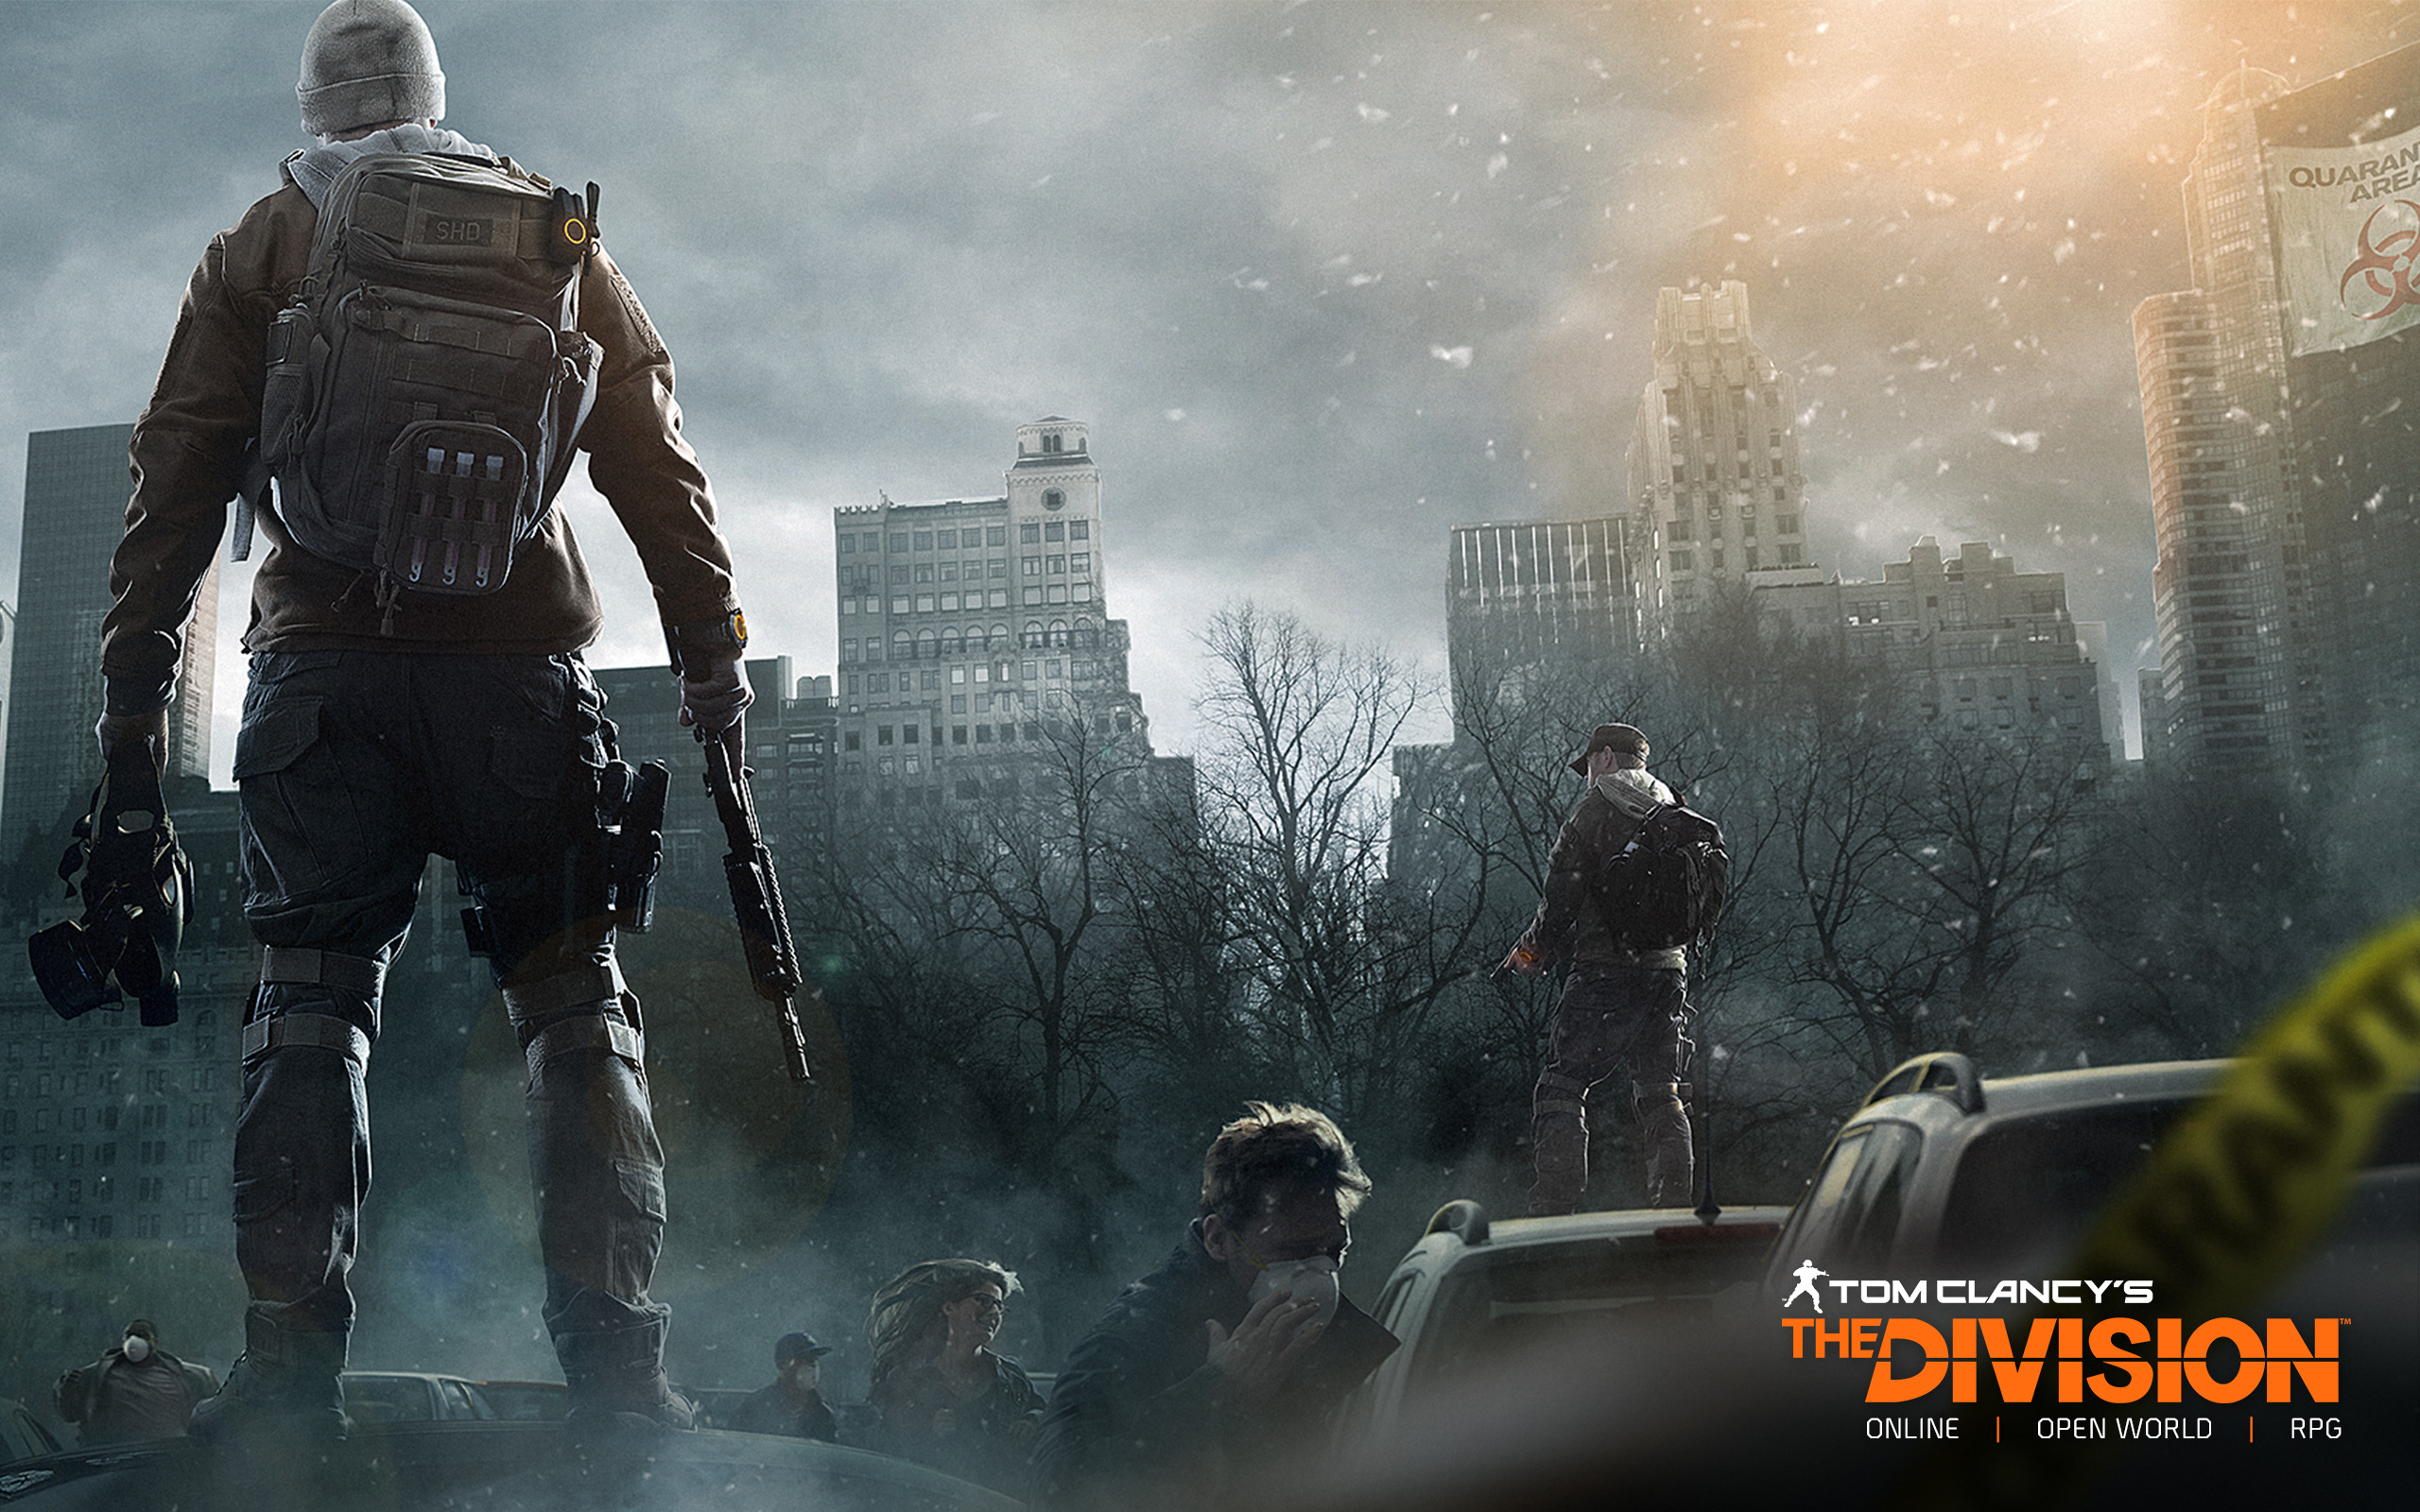 TheDivision_Wallpapers_2560x1600.jpg